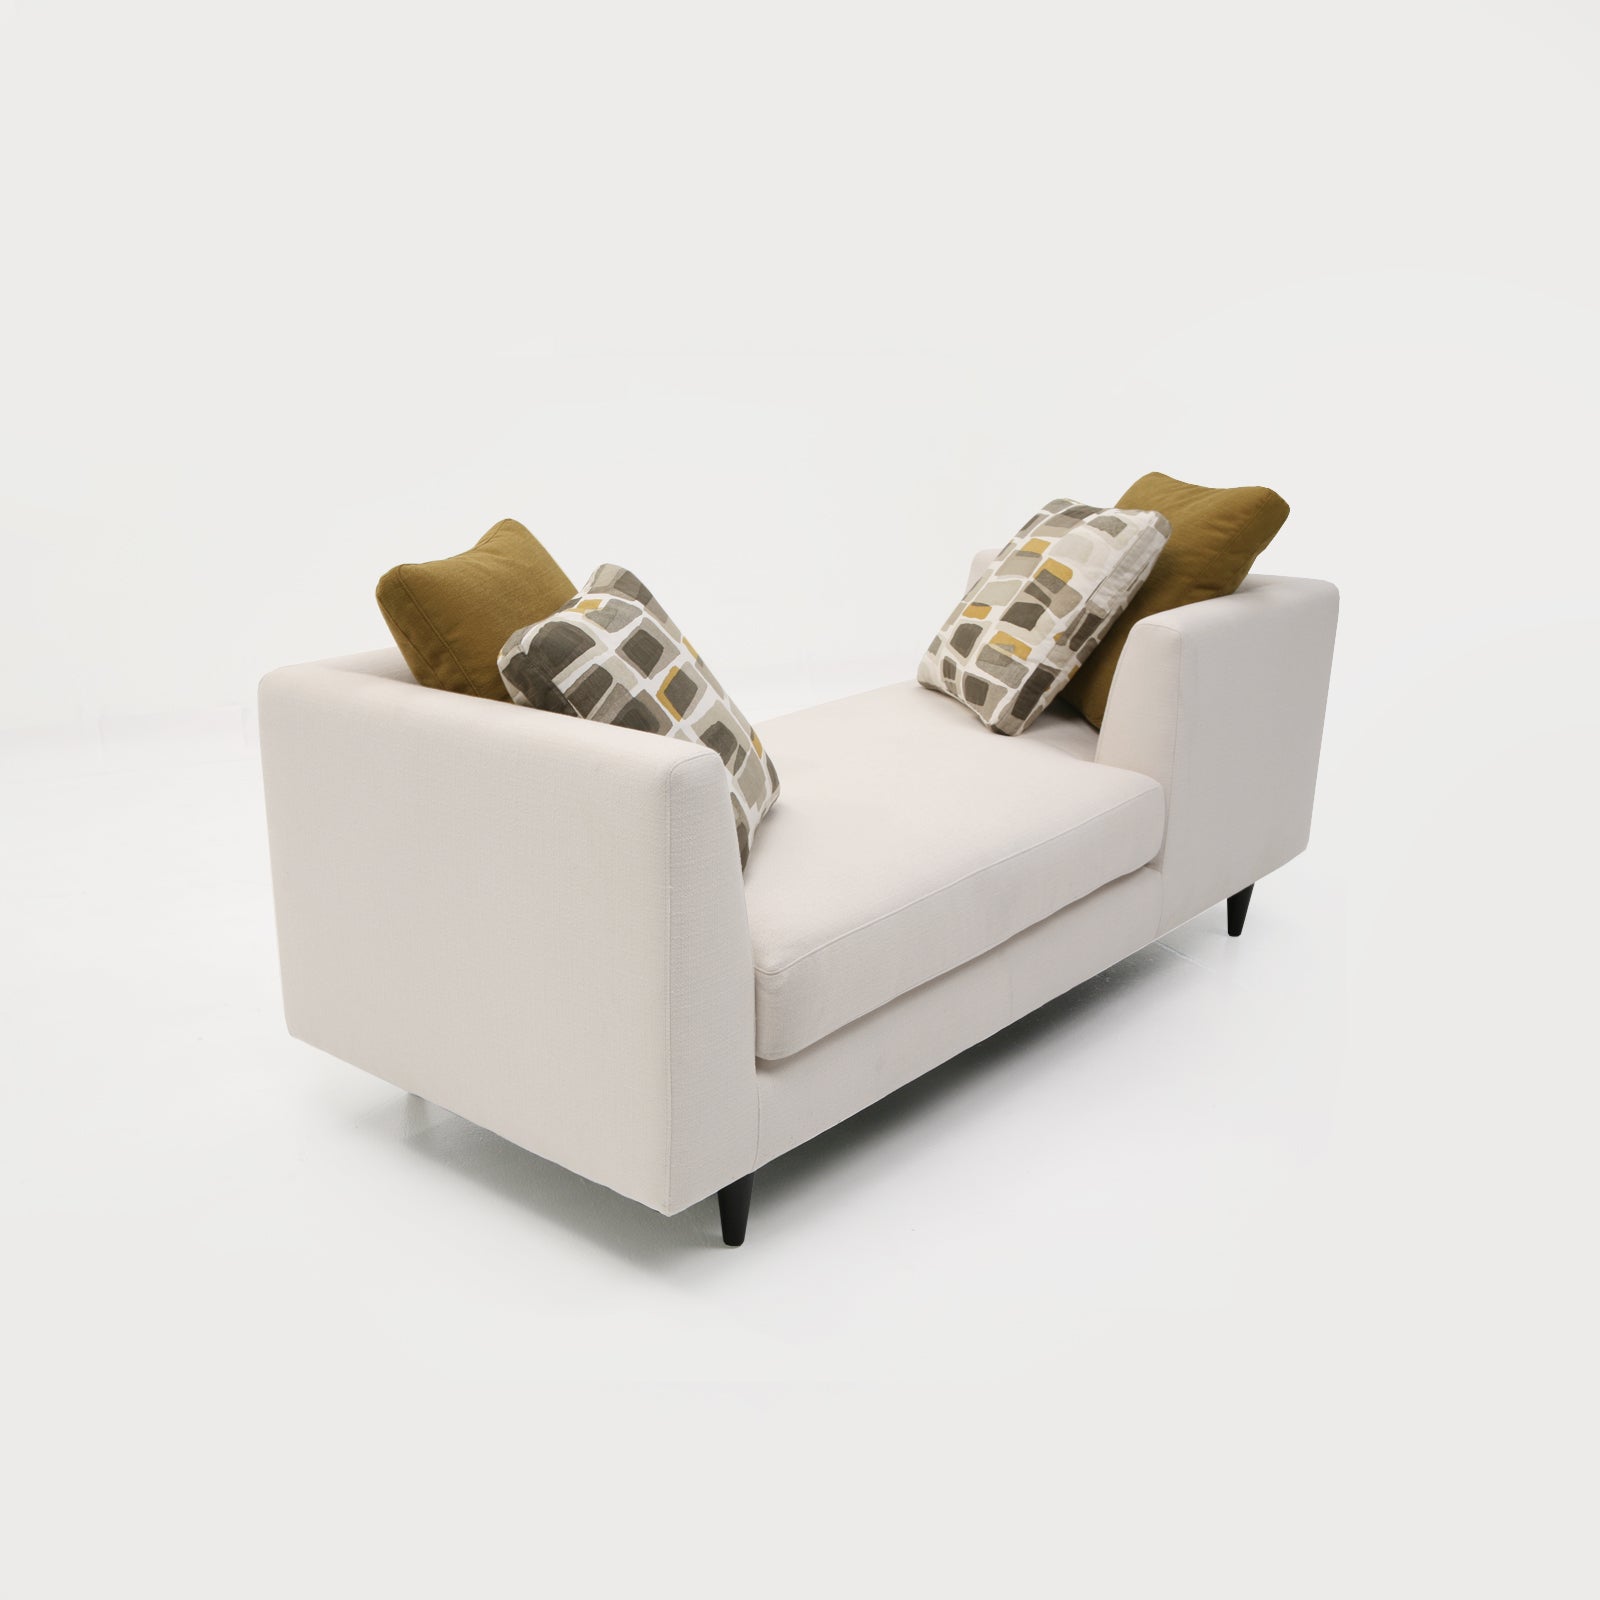 Focus One Home Joins the Trade Source Furniture Collection